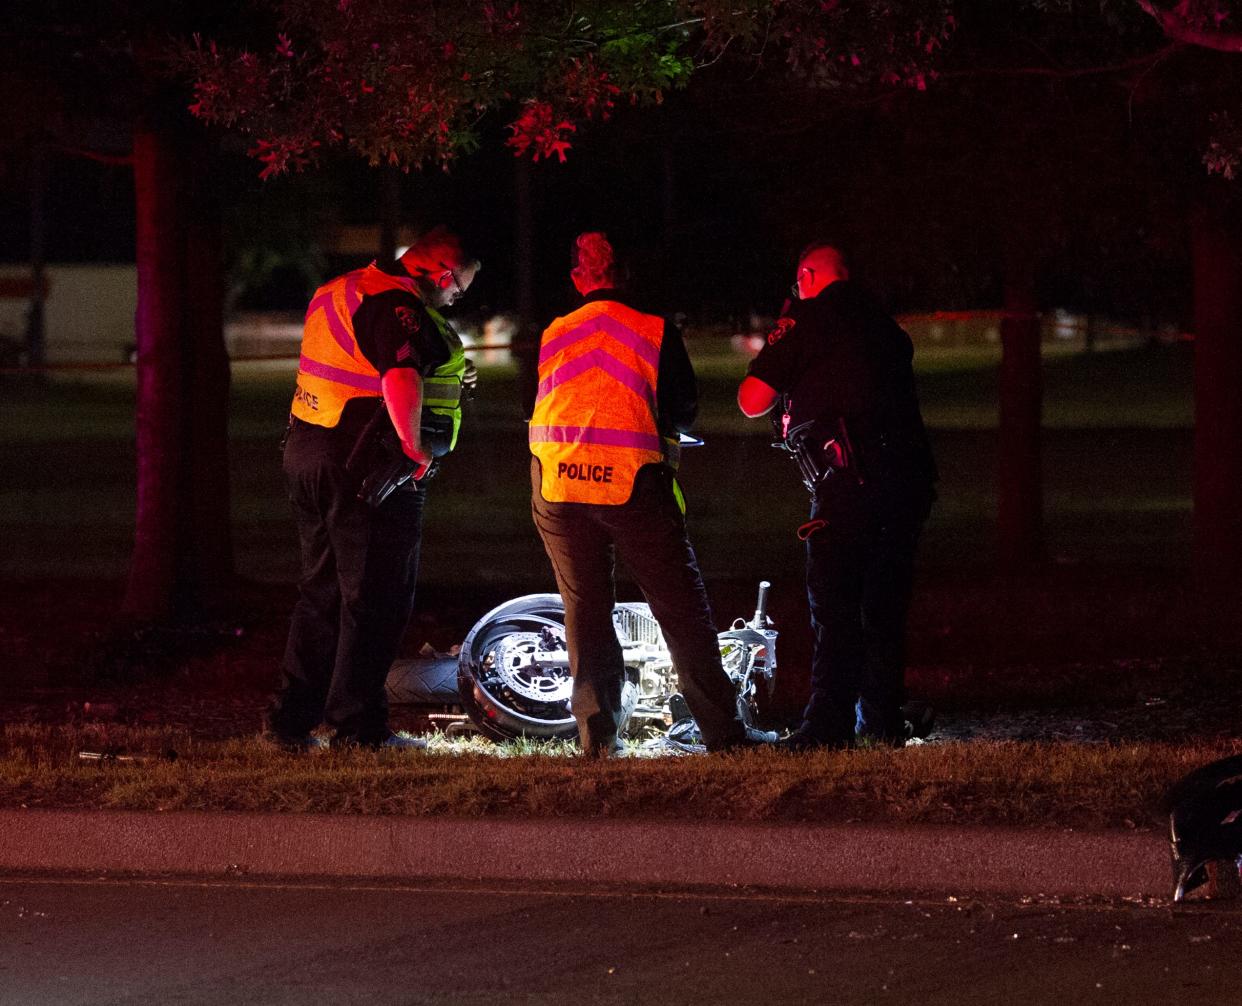 A fatal motorcycle crash scene, at which a man and woman were killed when the motorcycle they were riding crashed into a tree.